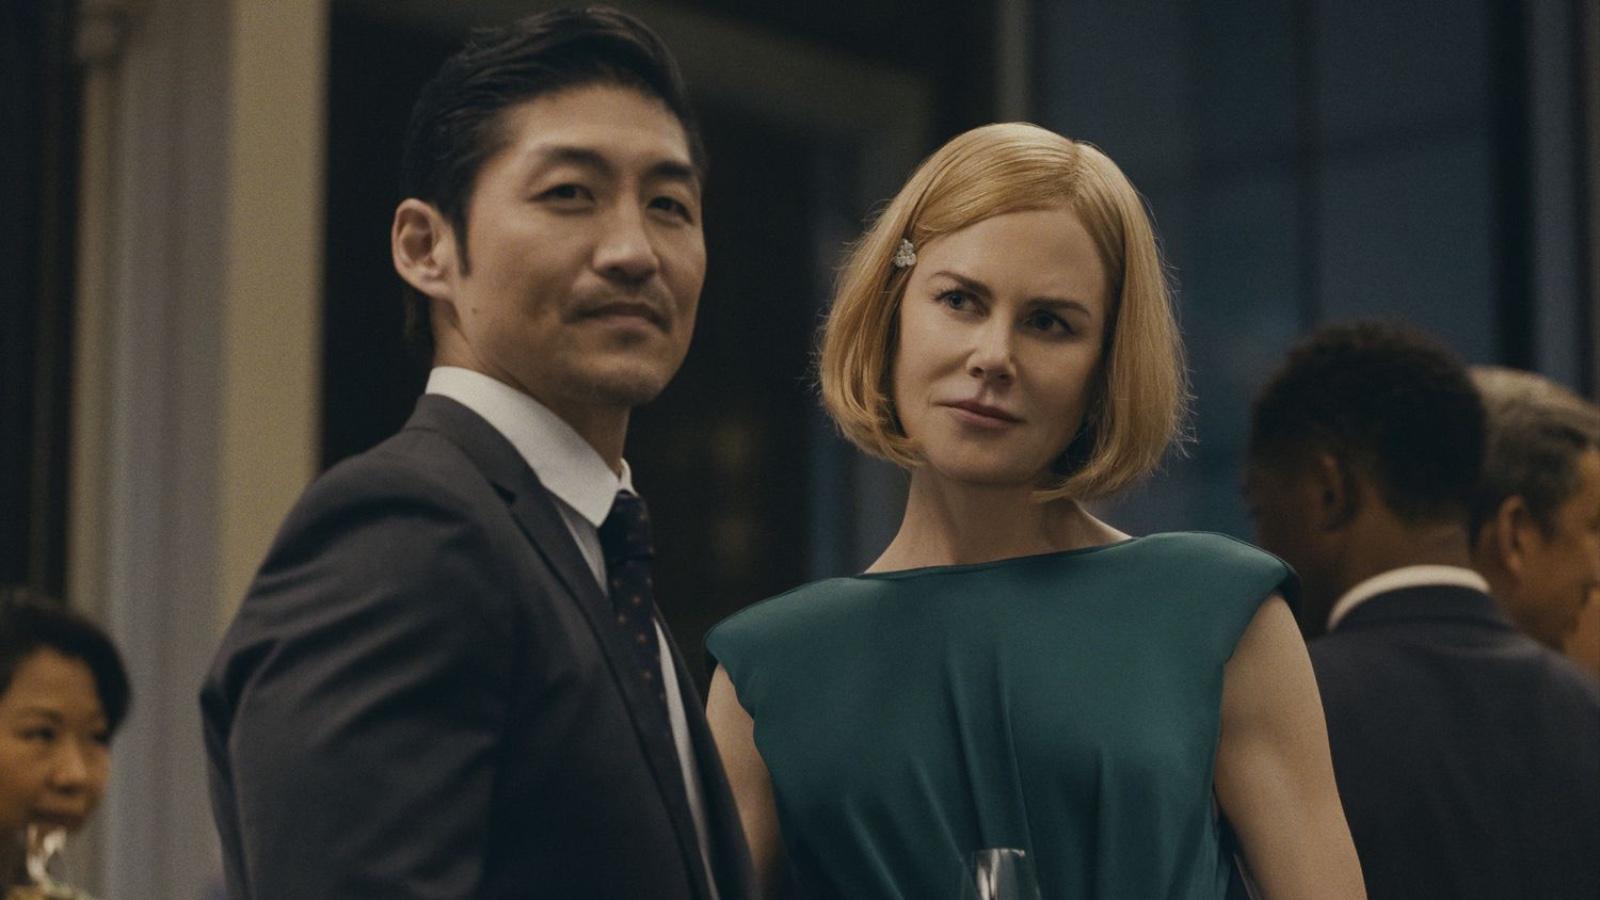 Brian Tee and Nicole Kidman in Expats as Margaret and Clarke.